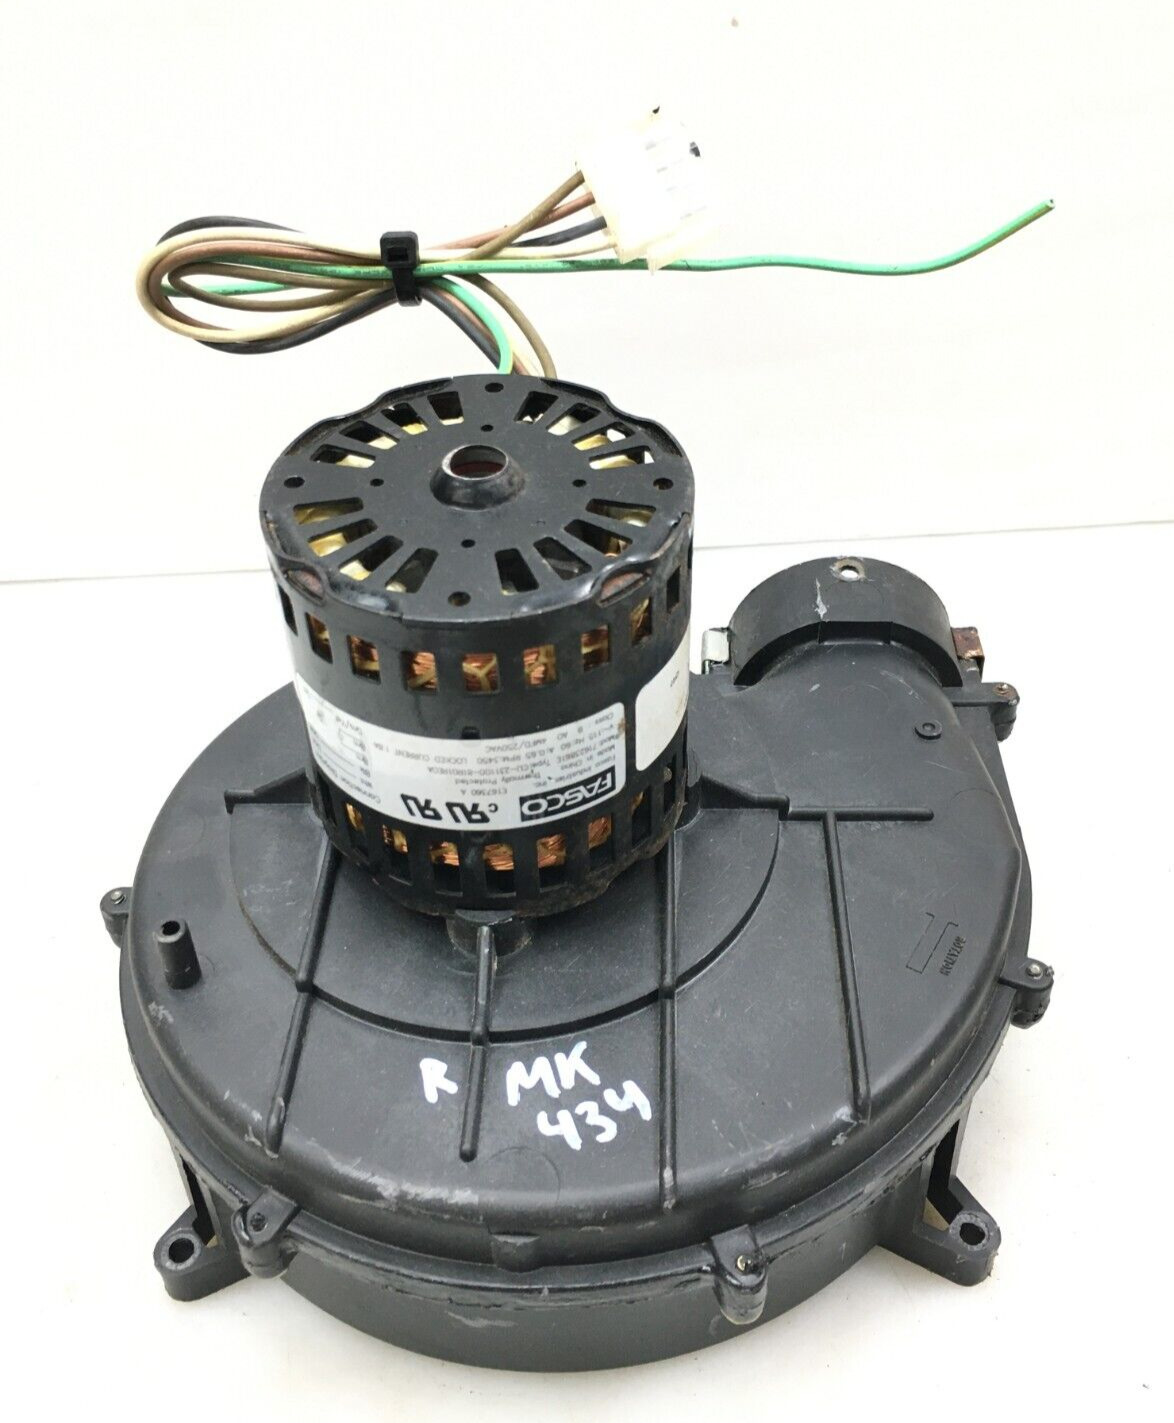 FASCO 7062-3861 Inducer Blower Motor Assembly 70-24033-01-13 used refurb #RMK434